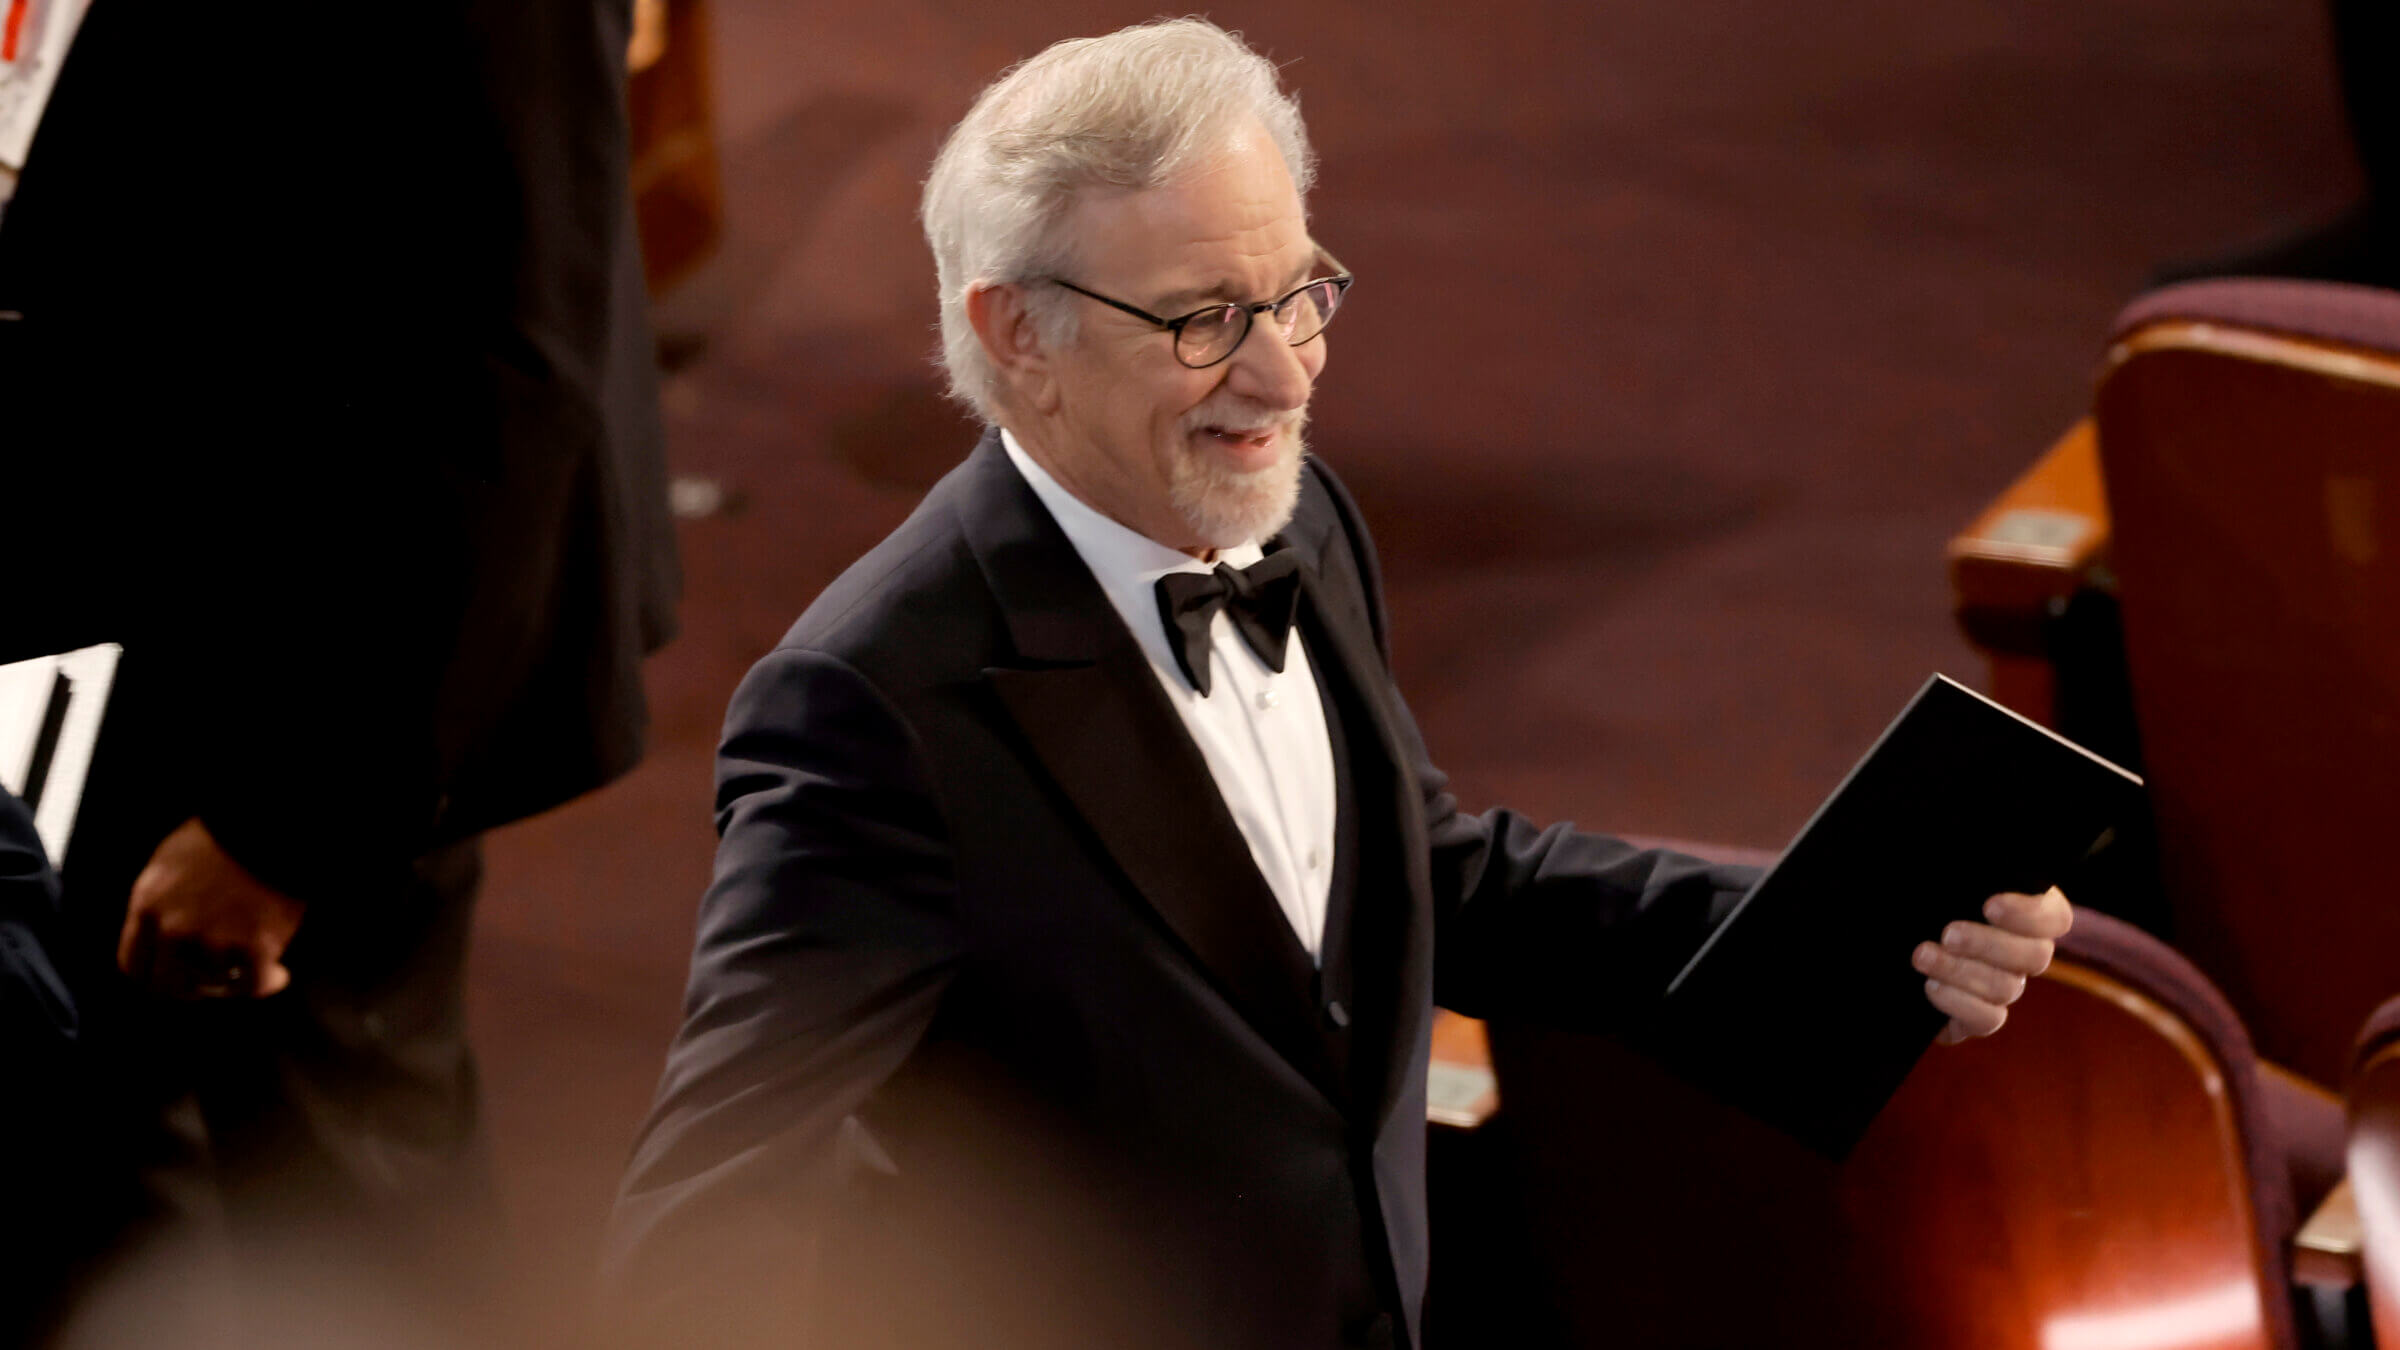 Steven Spielberg honed the template for telling personal family stories through genre conventions.